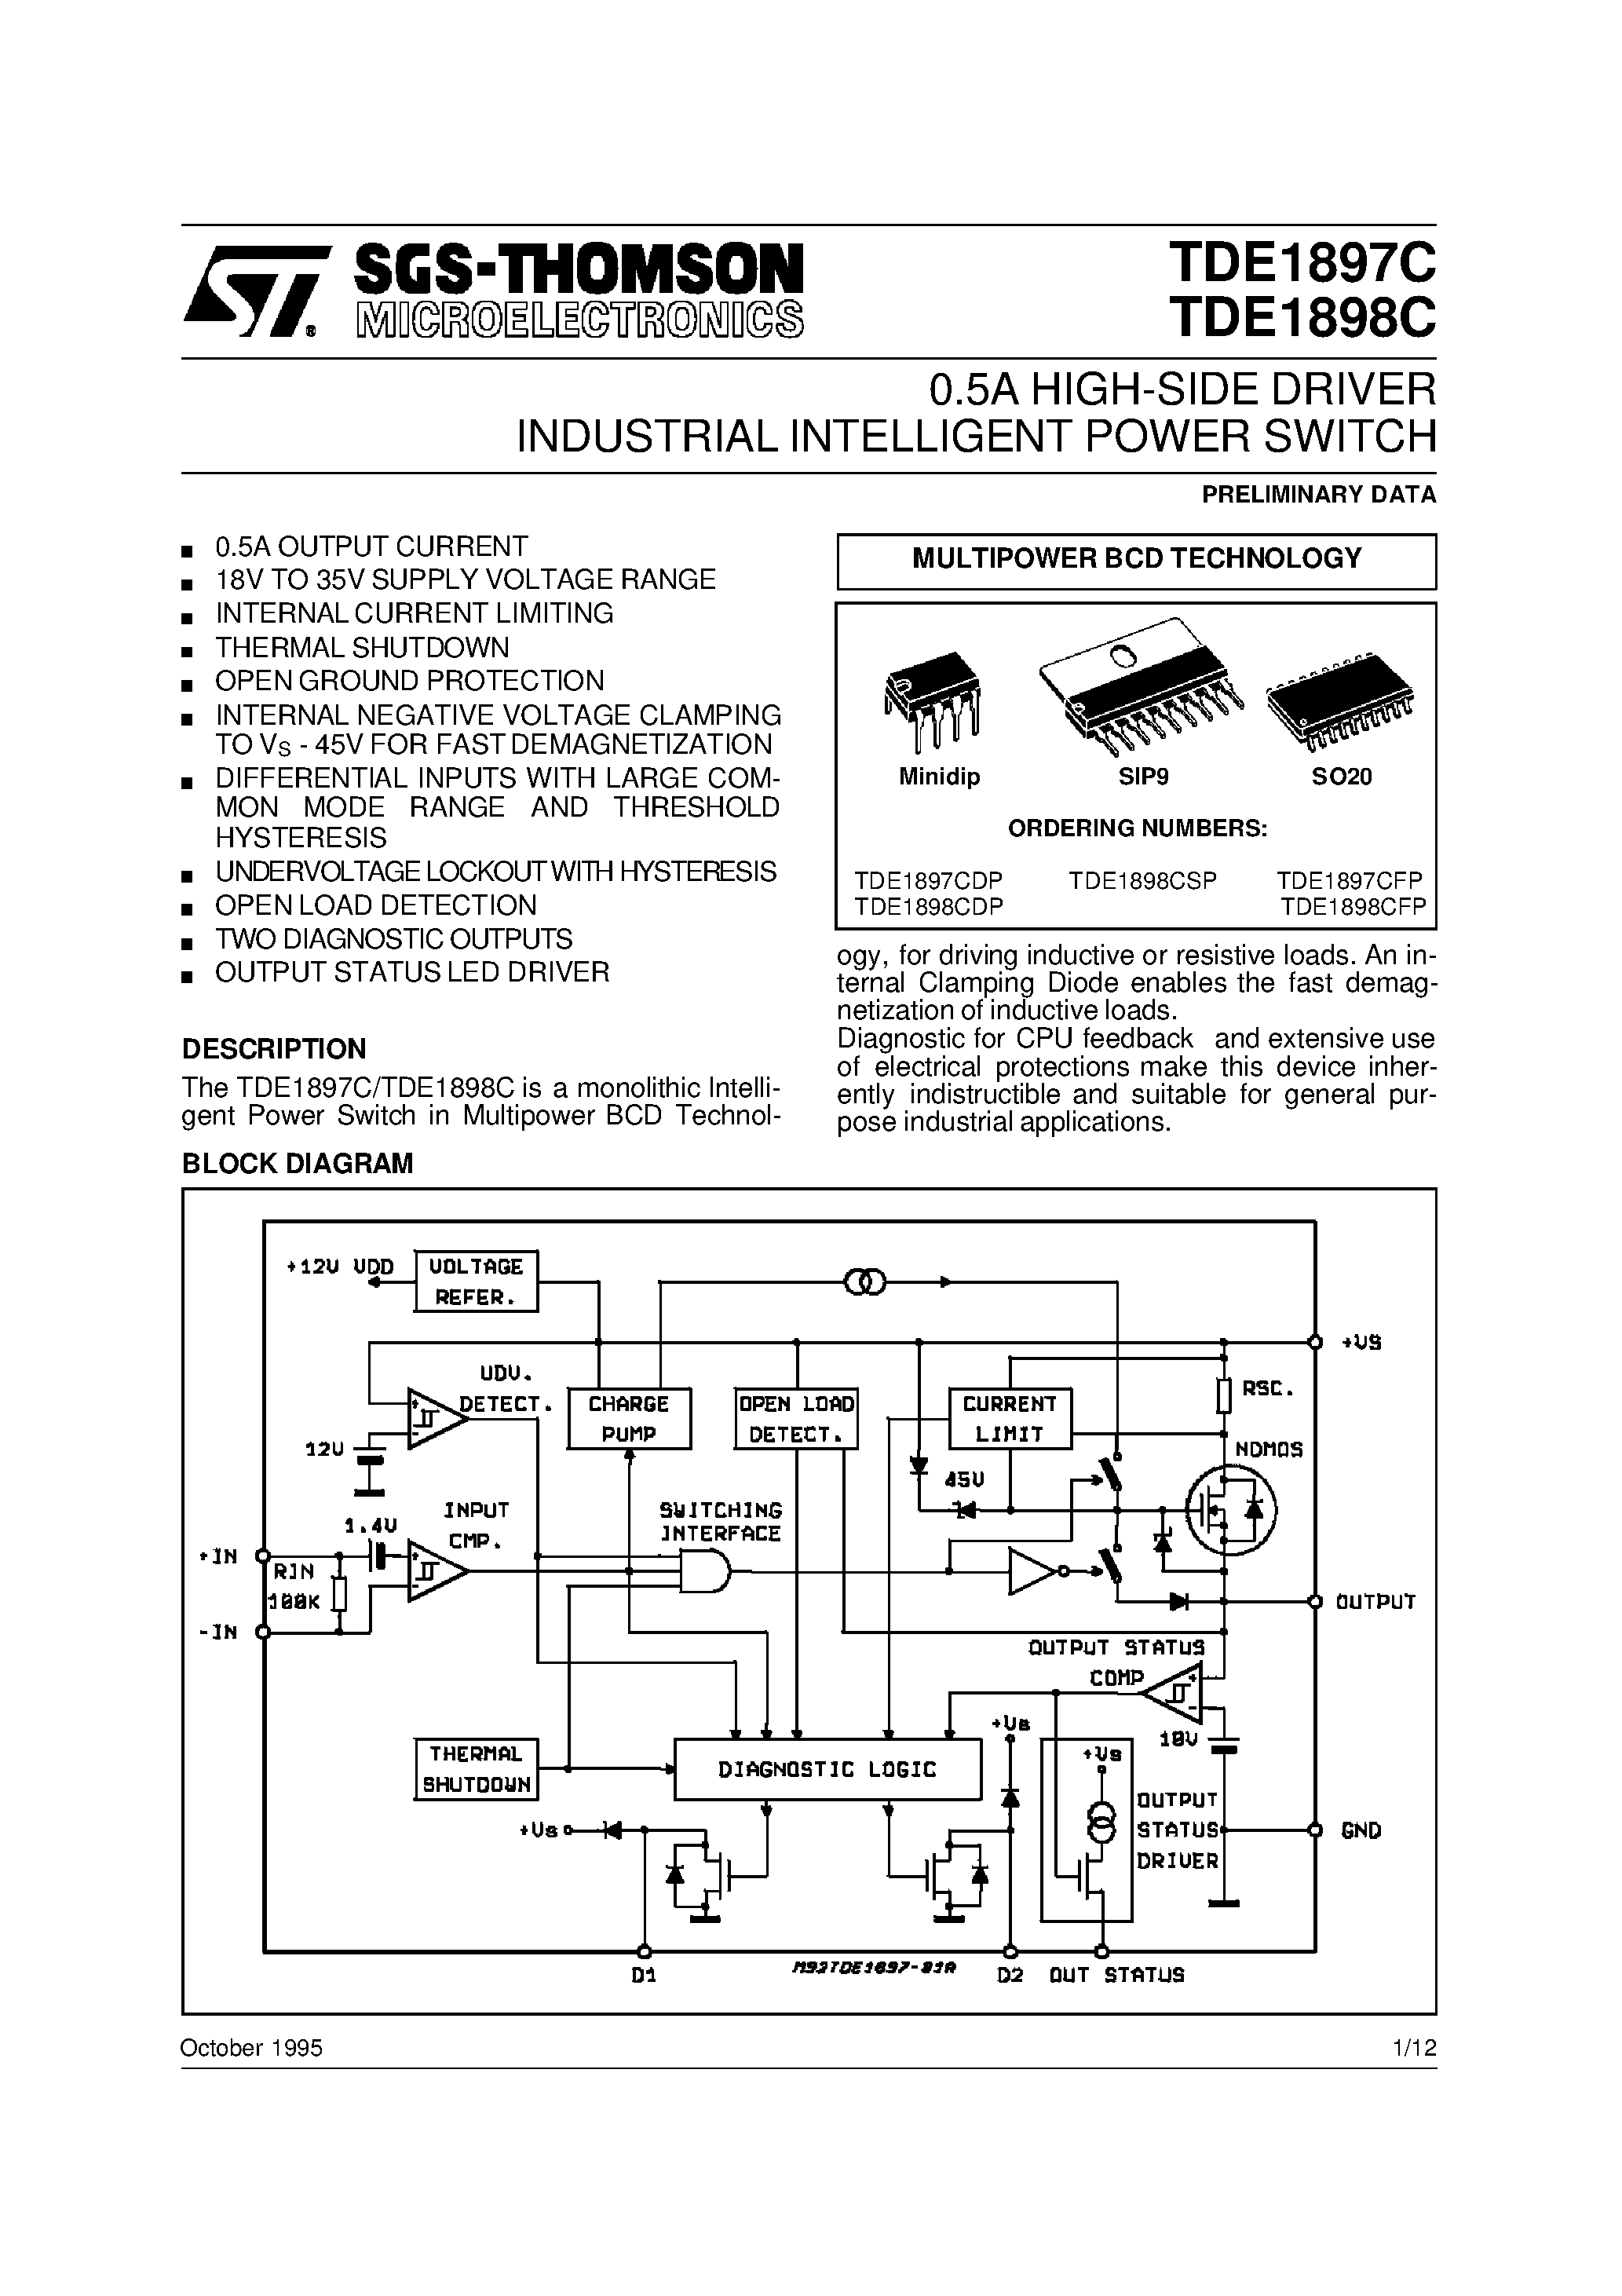 Даташит TDE1898CSP-0.5A HIGH-SIDE DRIVER INDUSTRIAL INTELLIGENT POWER SWITCH страница 1